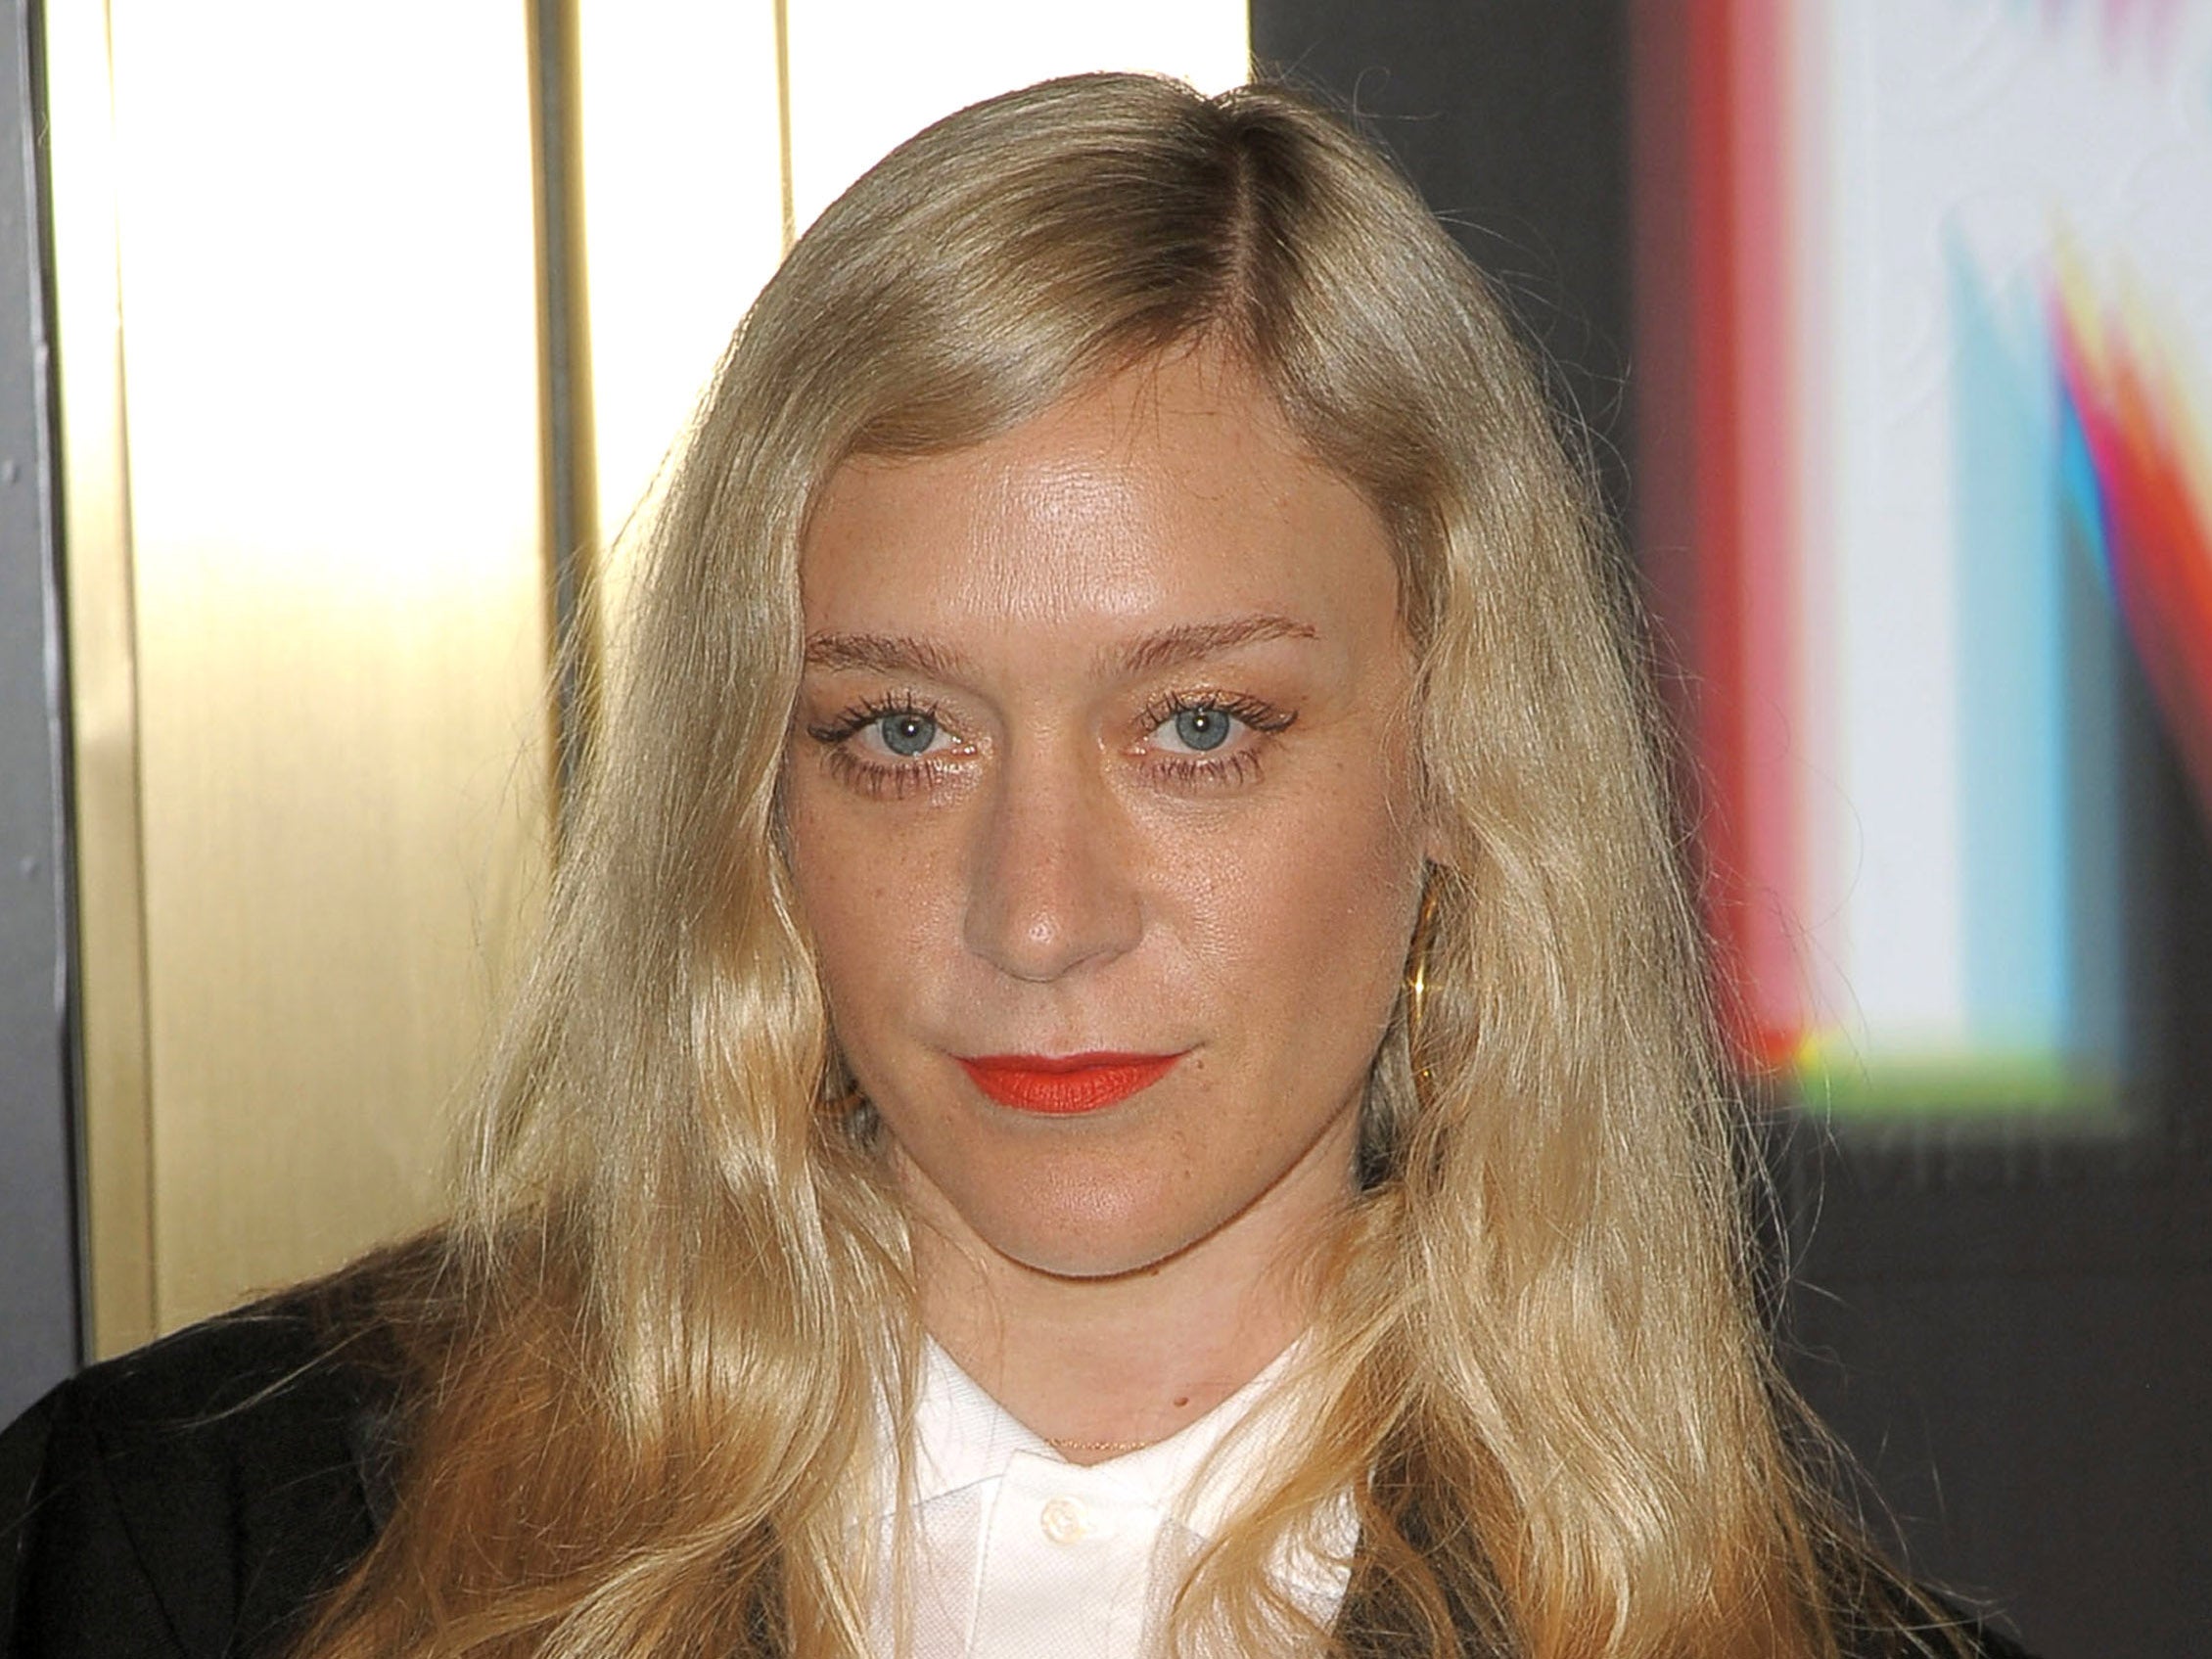 Downtown girl: Sevigny was reluctant to play a heroin abuser in case it glamourised drug addiction